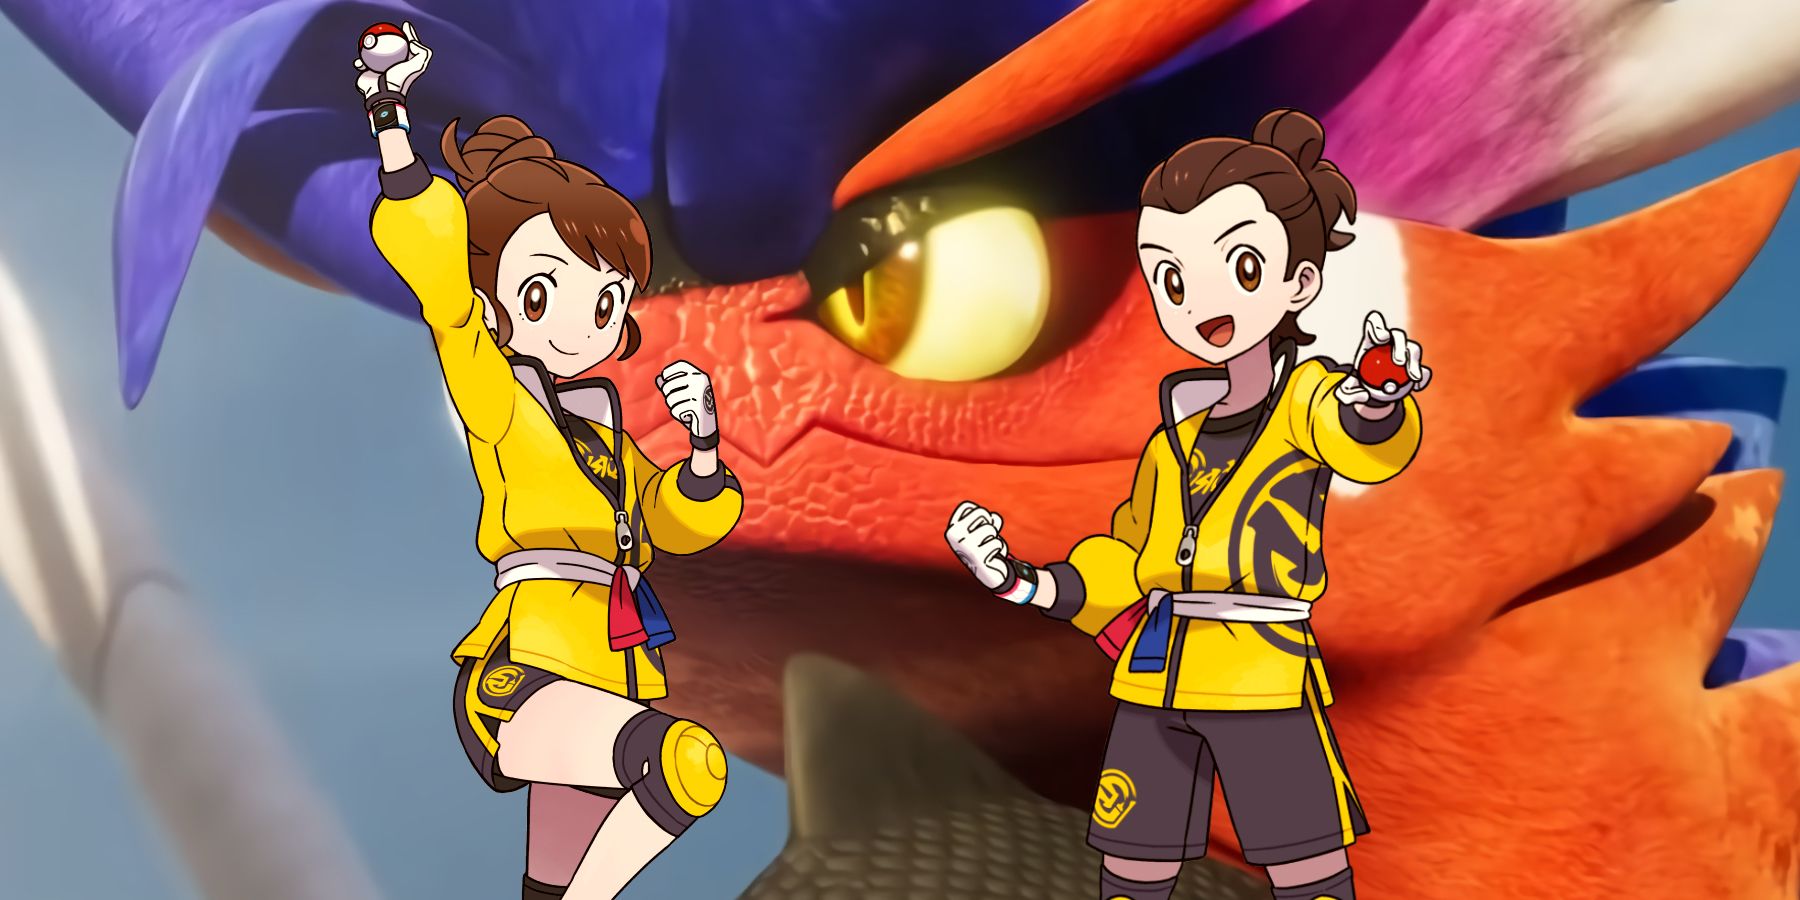 Pokemon Sword and Shield Isle of Armor DLC gets a release date and trailer